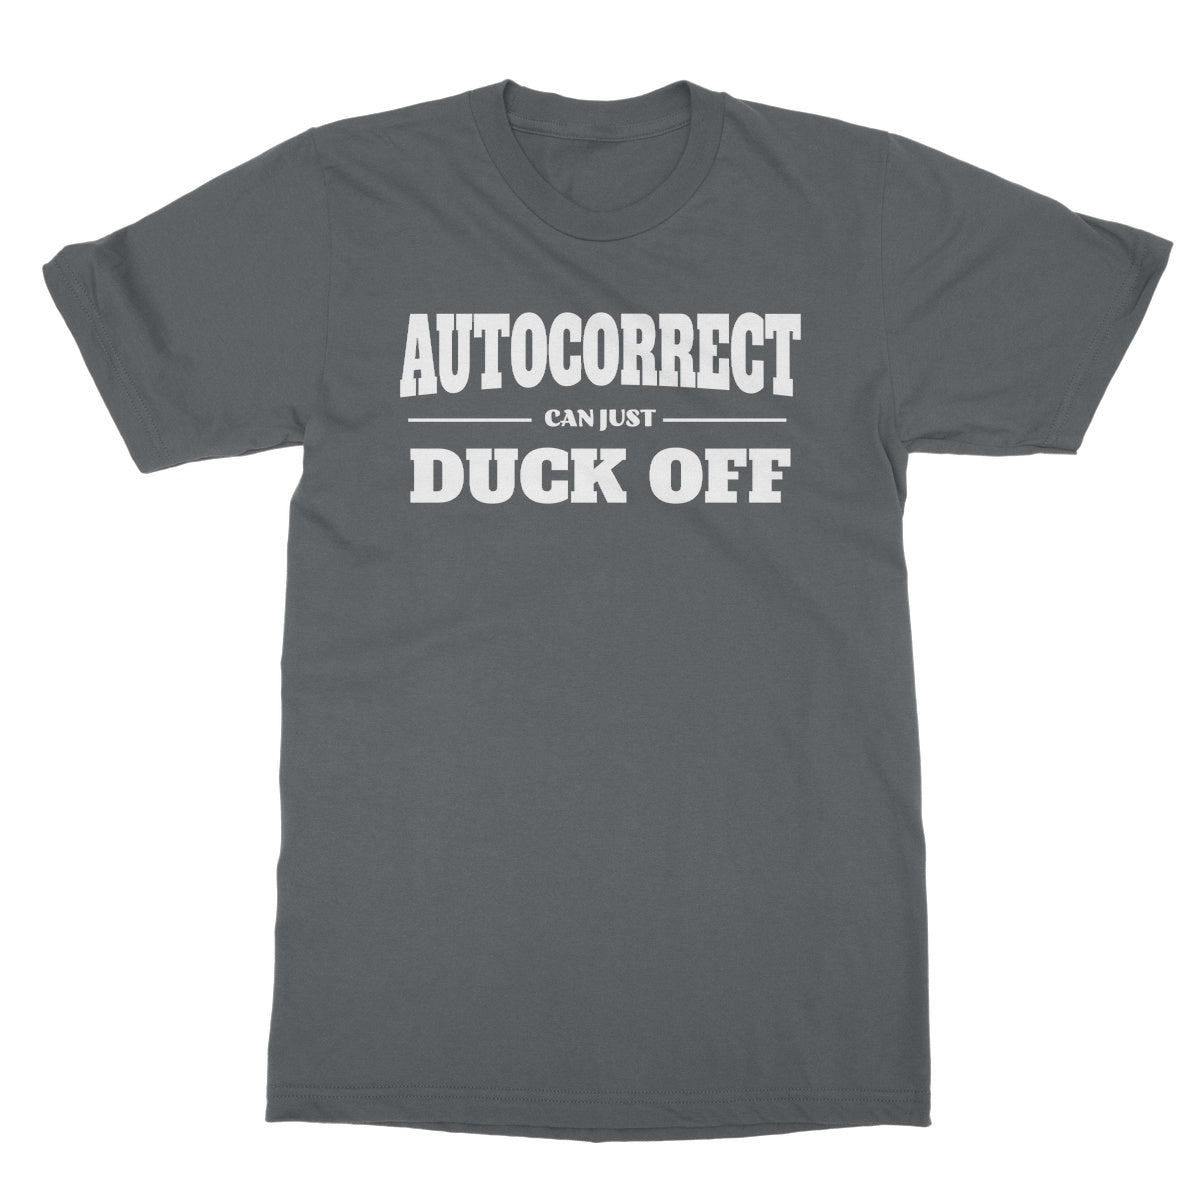 autocorrect can duck off t shirt grey